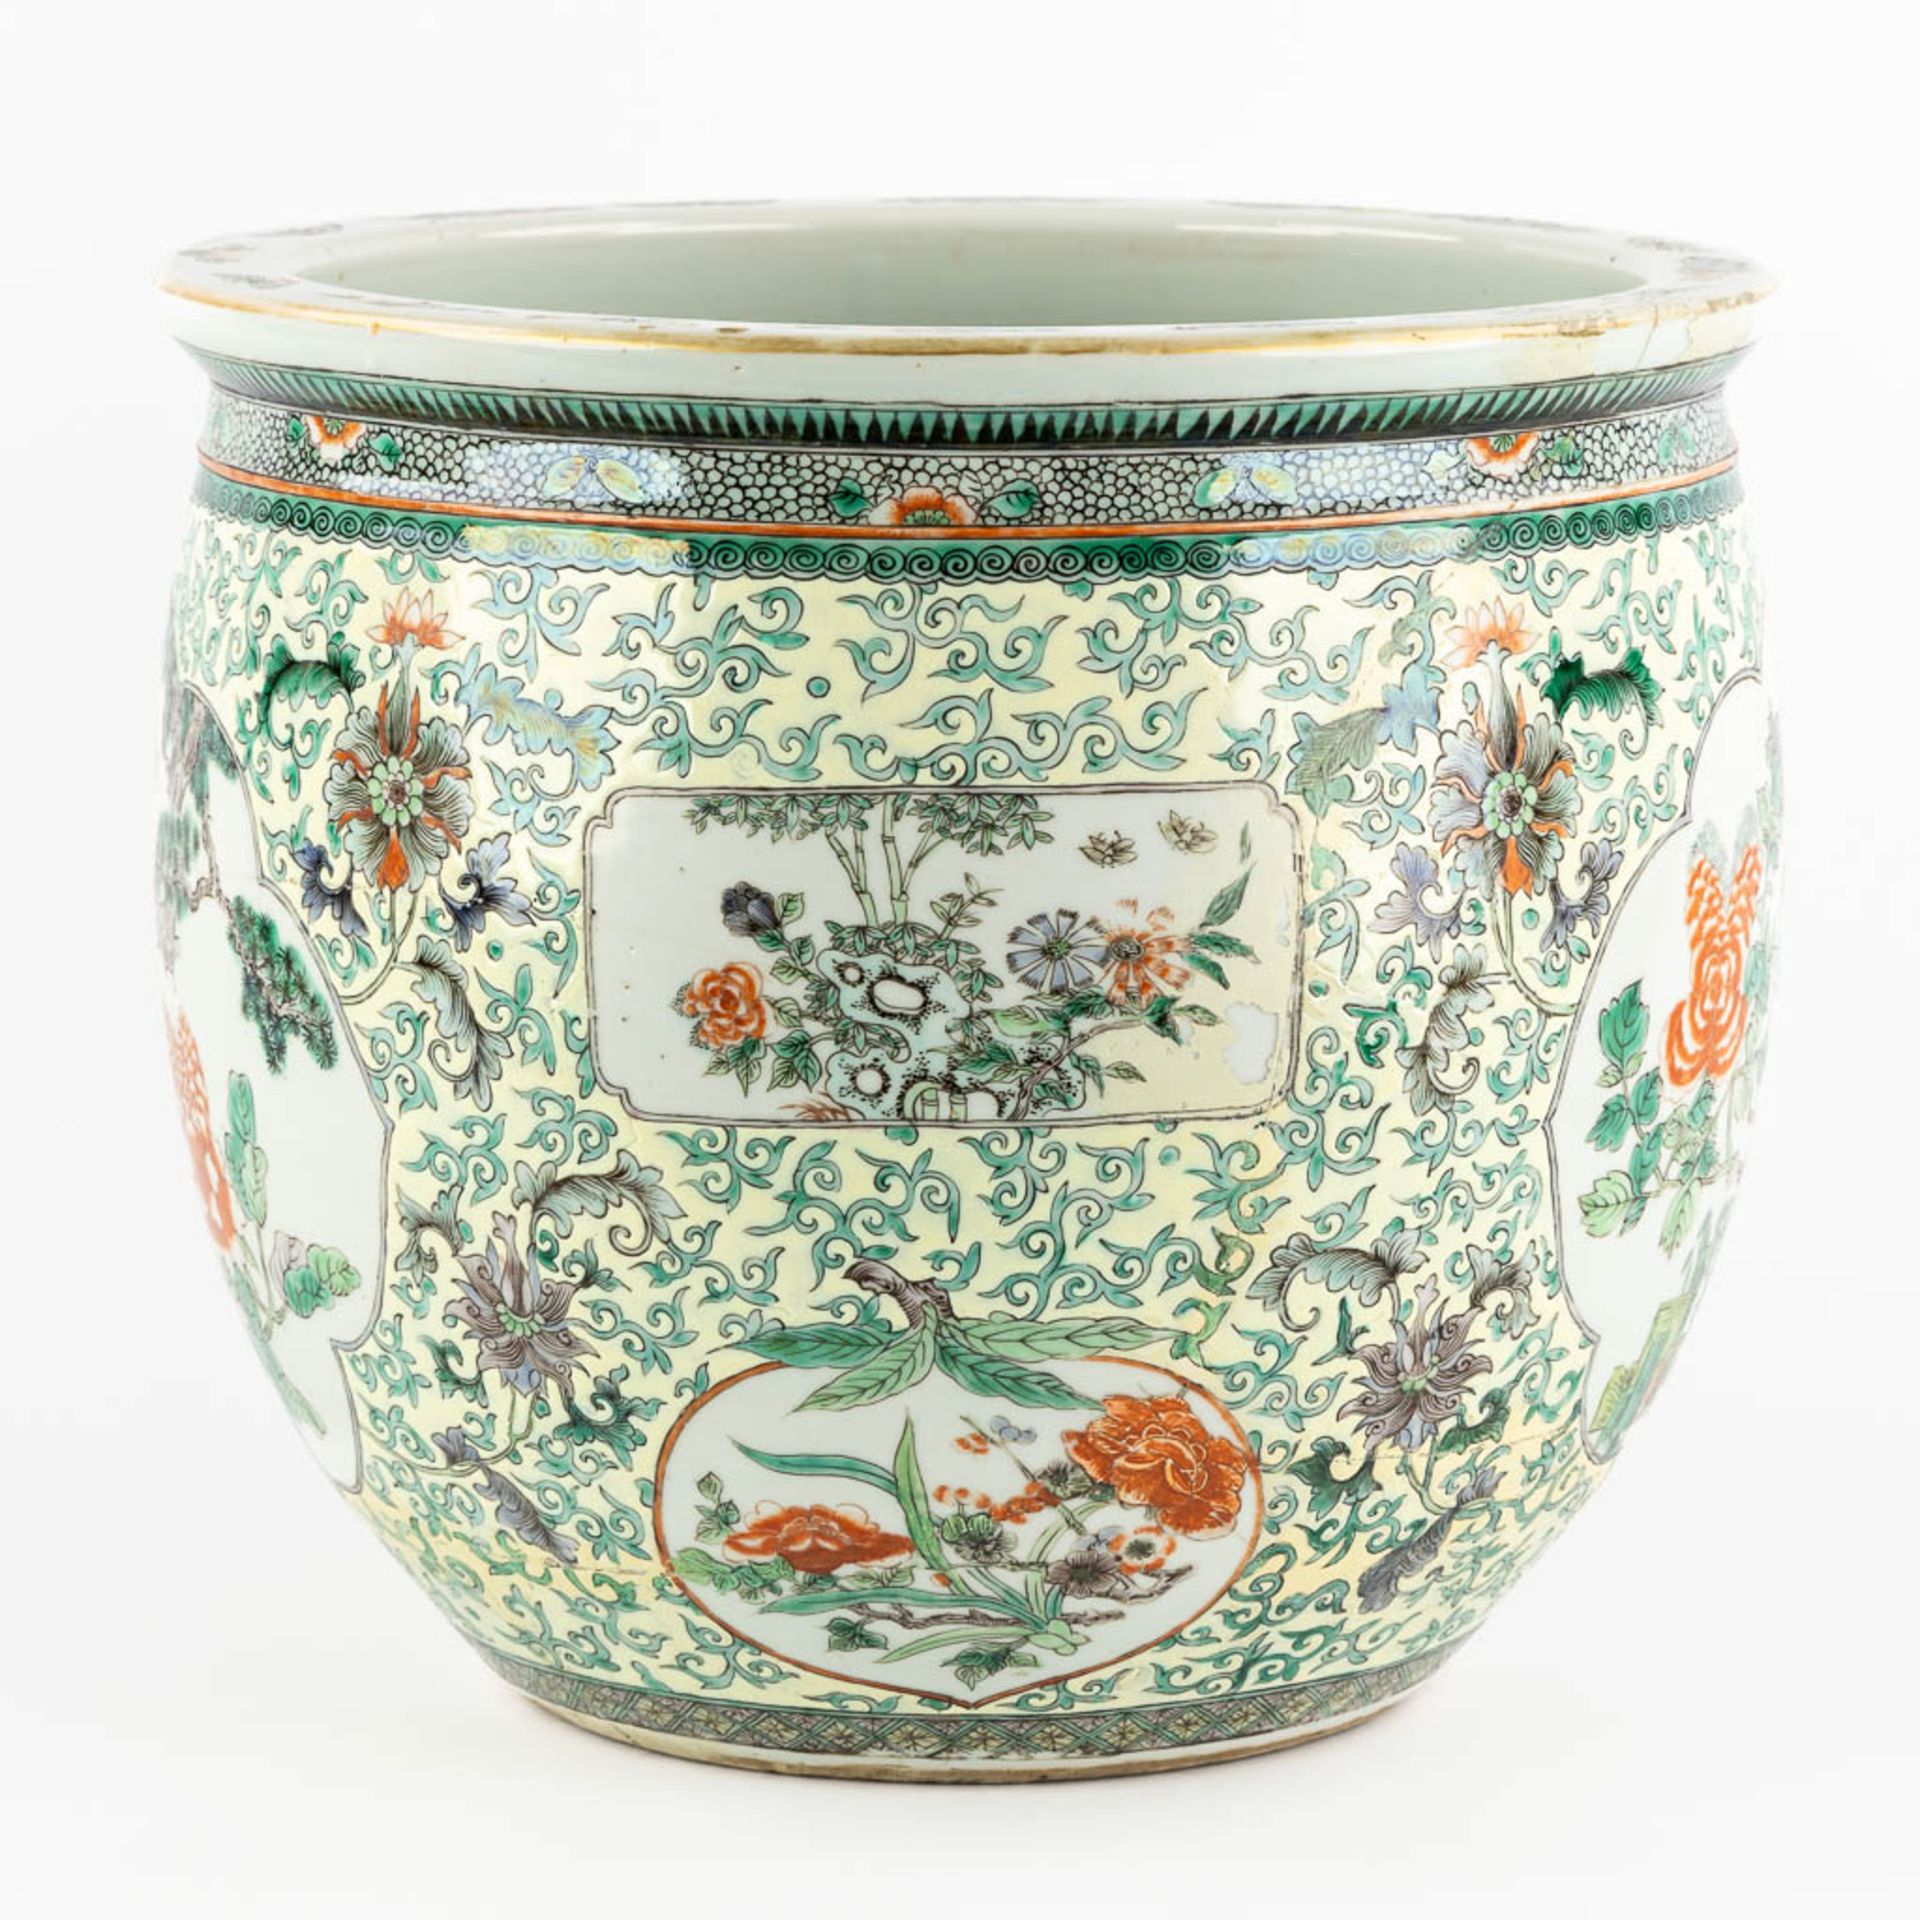 A Large Chinese Cache-Pot, Famille Verte decorated with fauna and flora. 19th C. (H:35 x D:40 cm) - Bild 7 aus 14